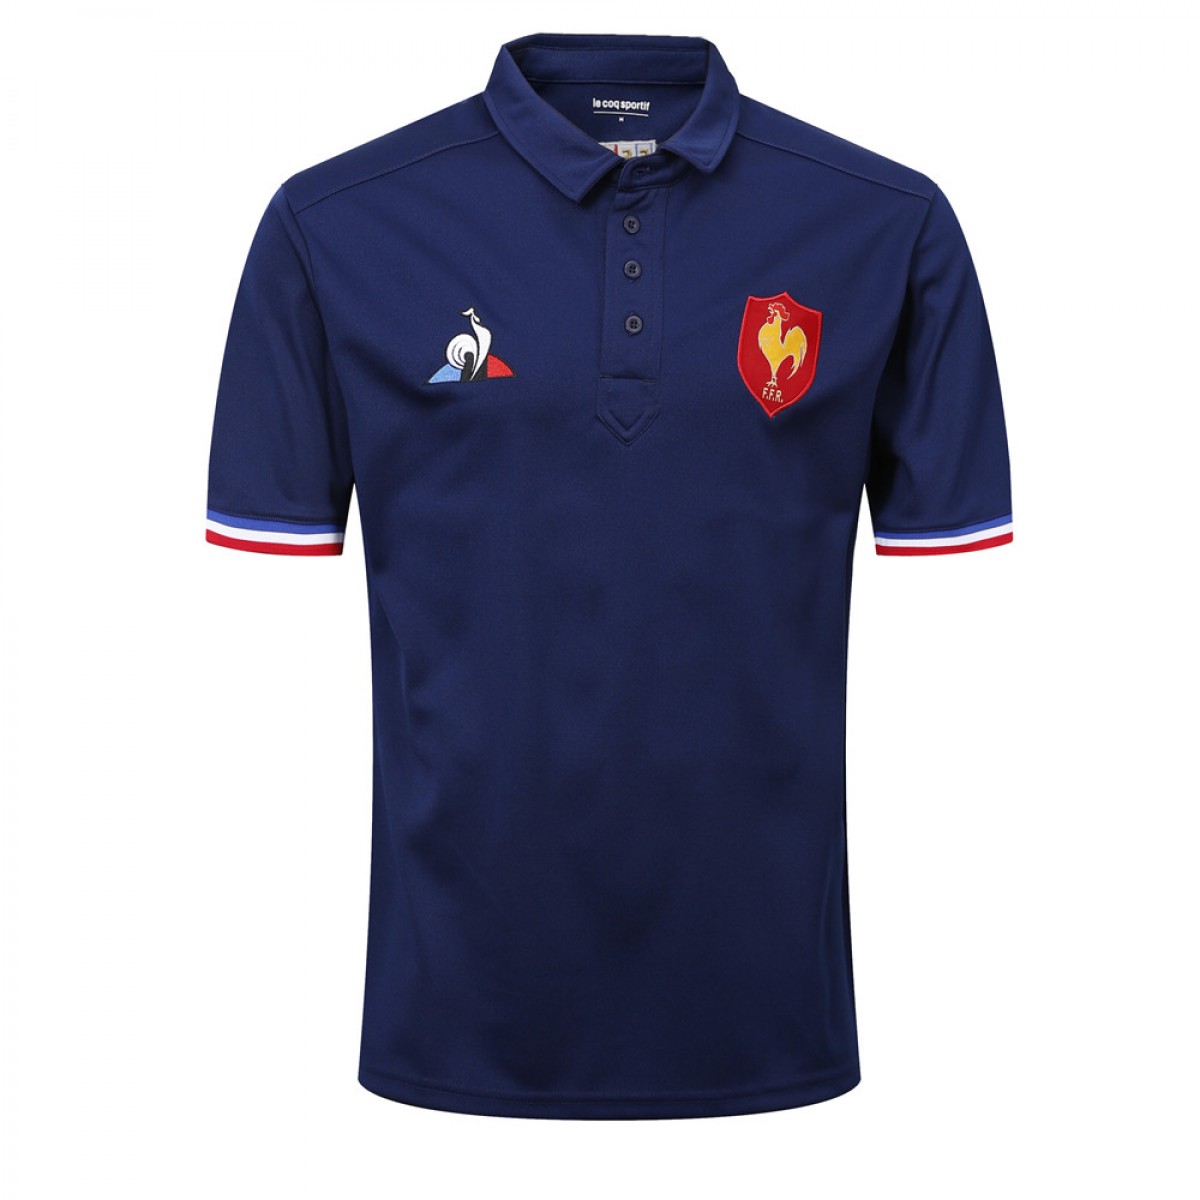 FRANCE 2018/2019 Retro XV home/away national team rugby jersey shirt S-3XL 